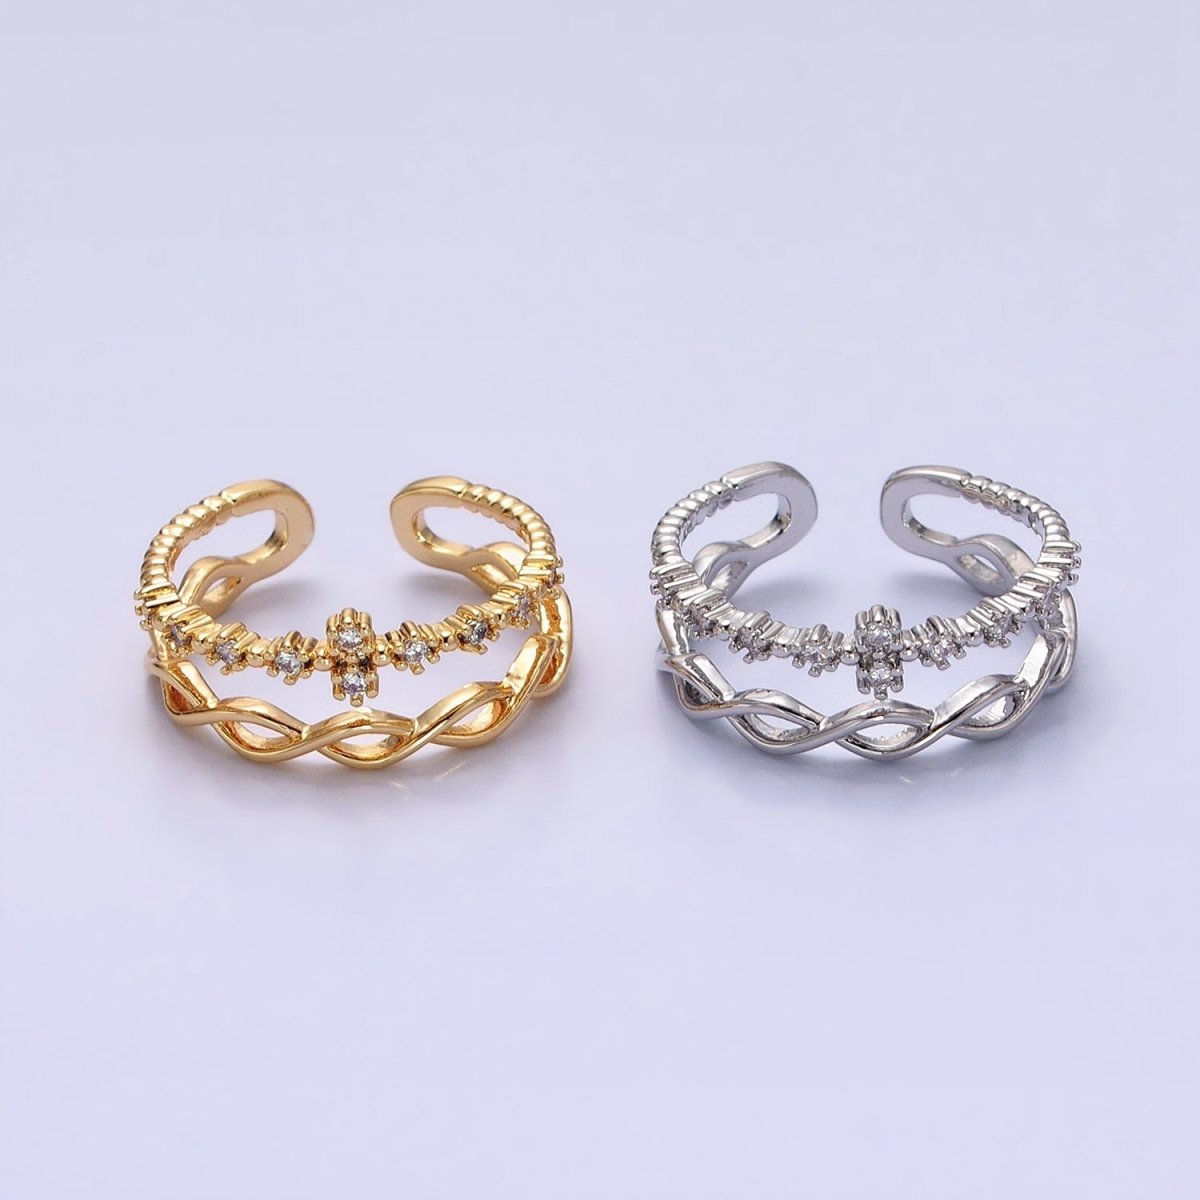 Double Band Ring Gold Twist Knot Band Open Adjustable Ring O-1809 O-1810 - DLUXCA